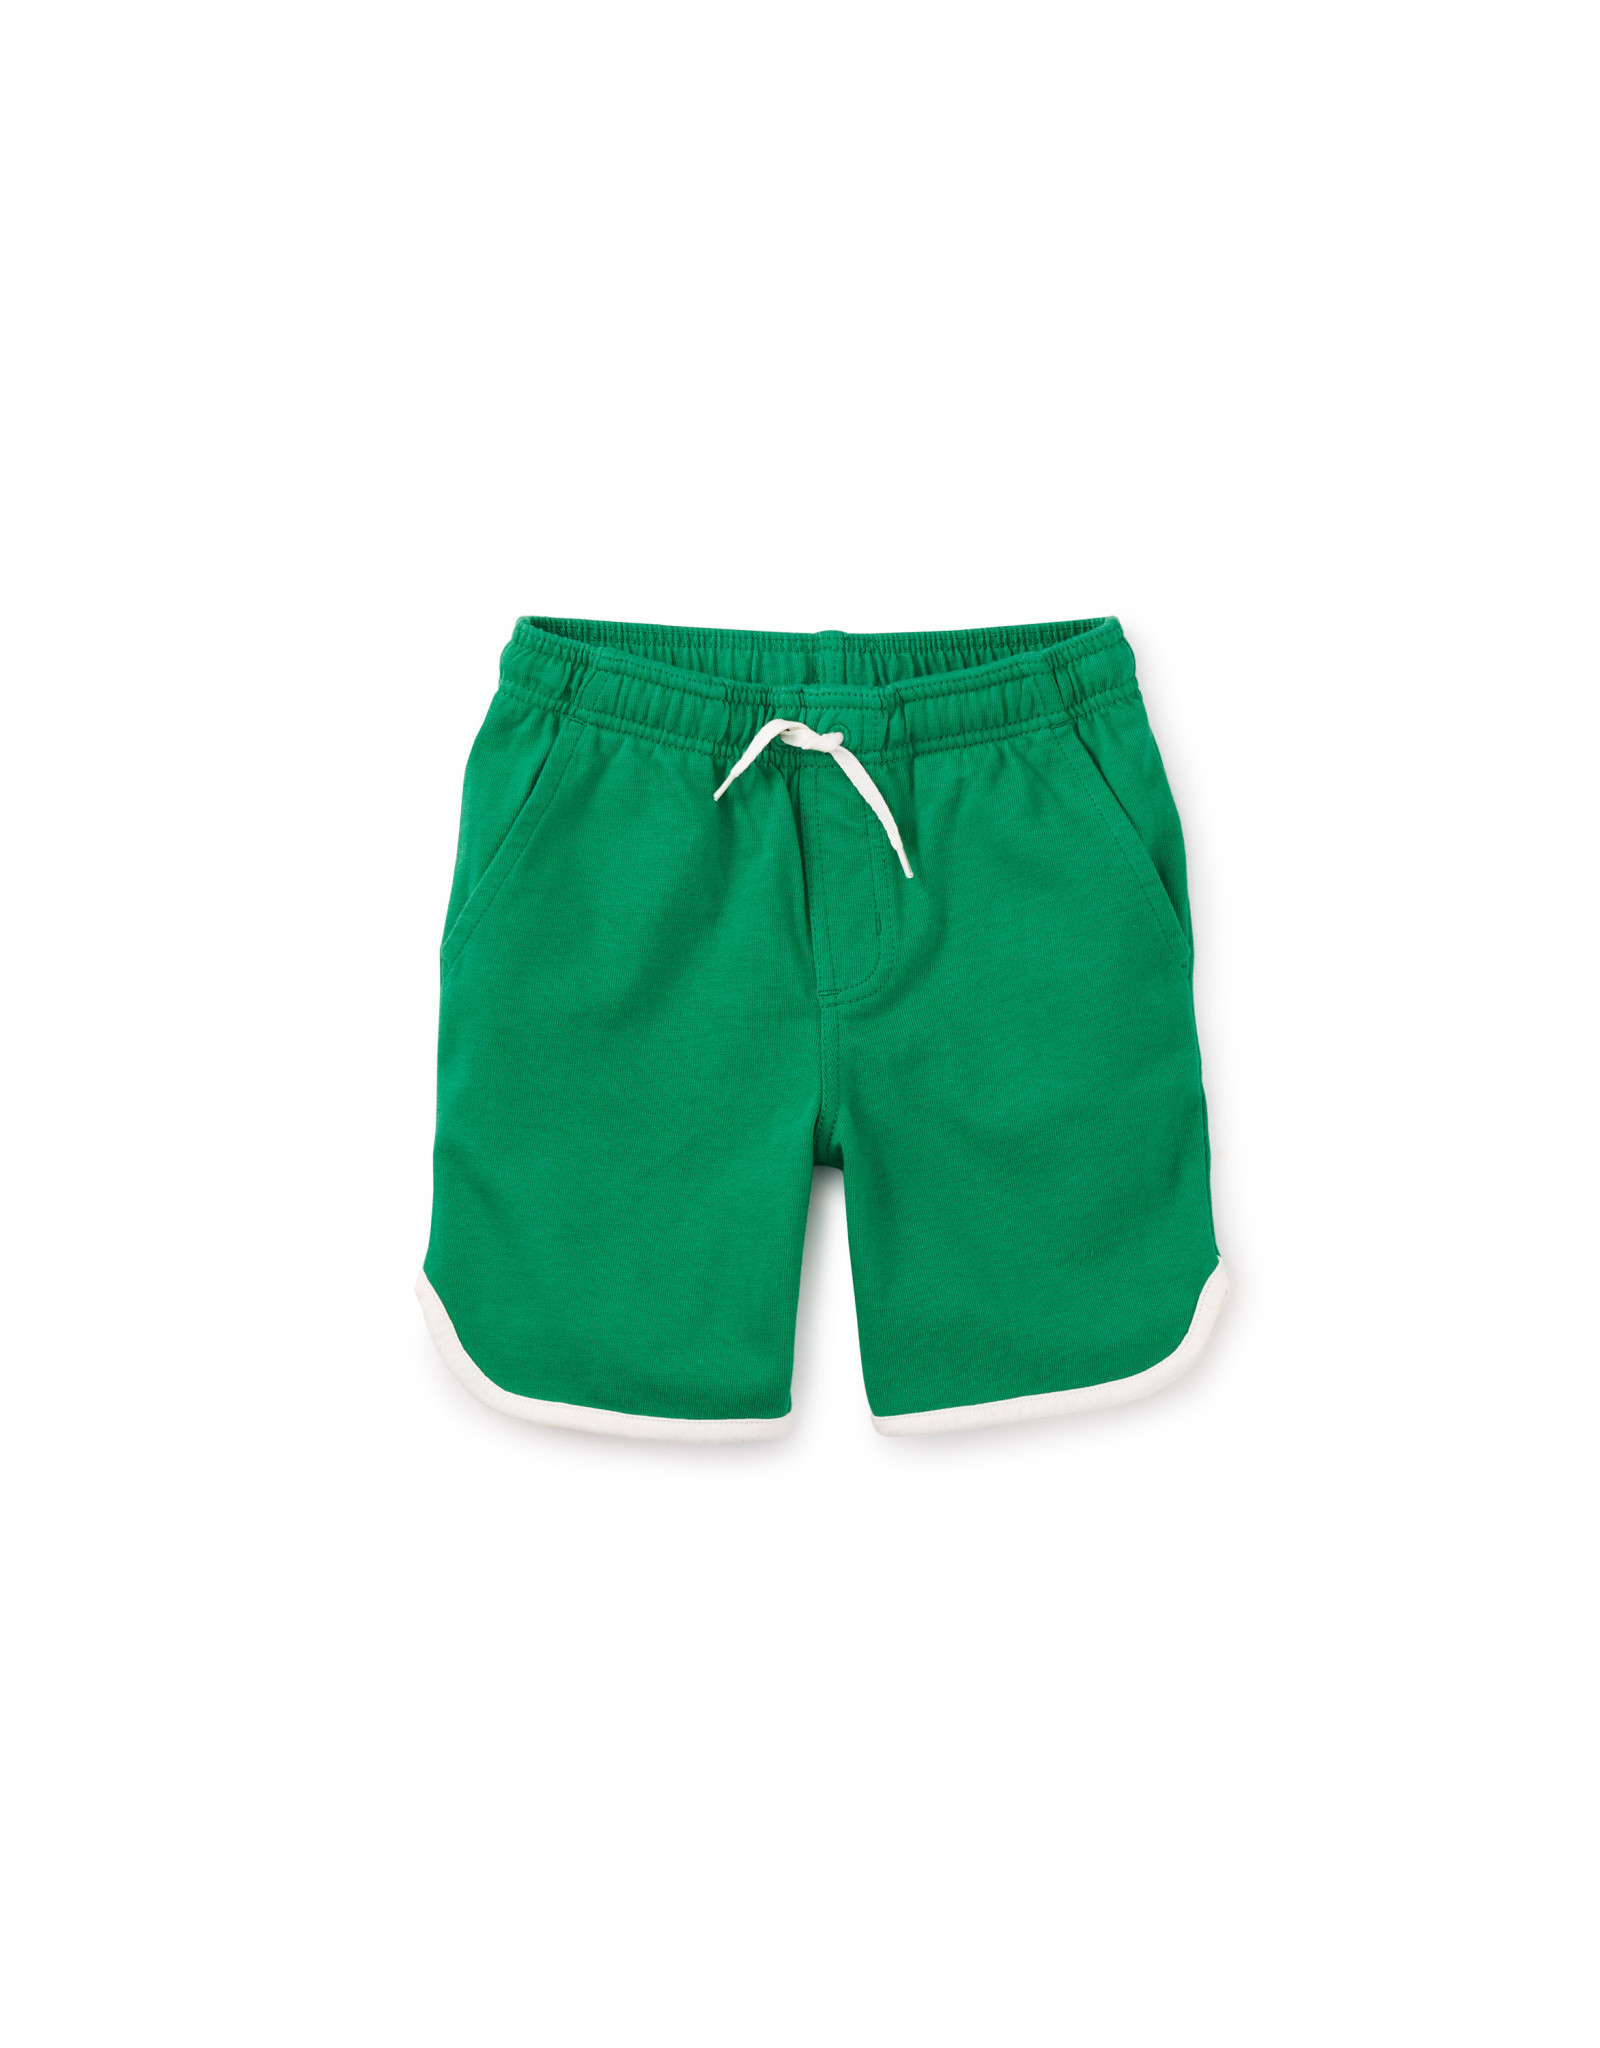 Tea Collection Ringer Shorts - Spinach